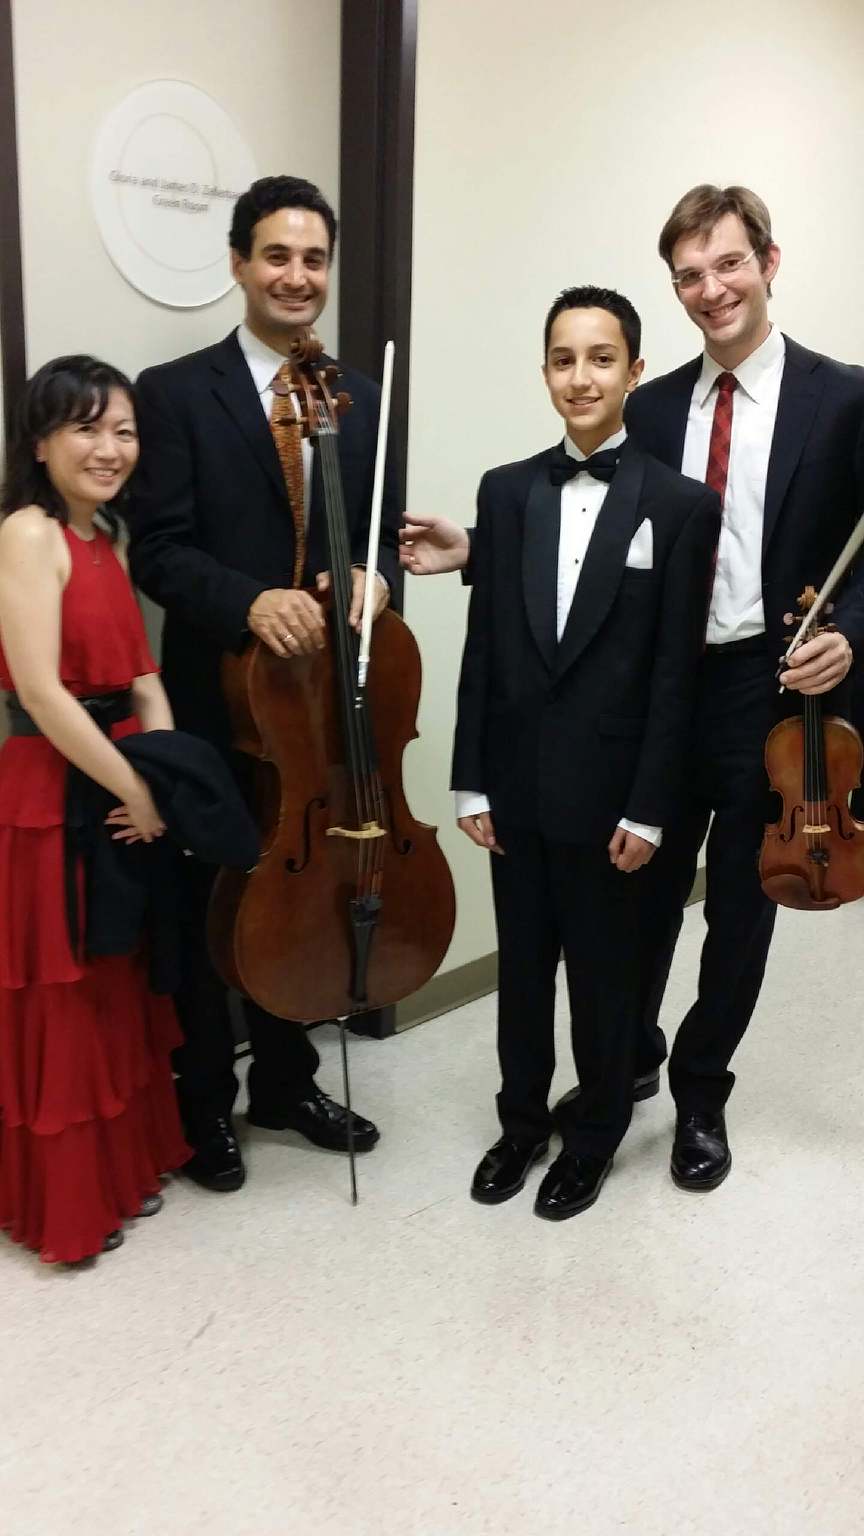 Gutierrez student selected to play with UTB Symphony